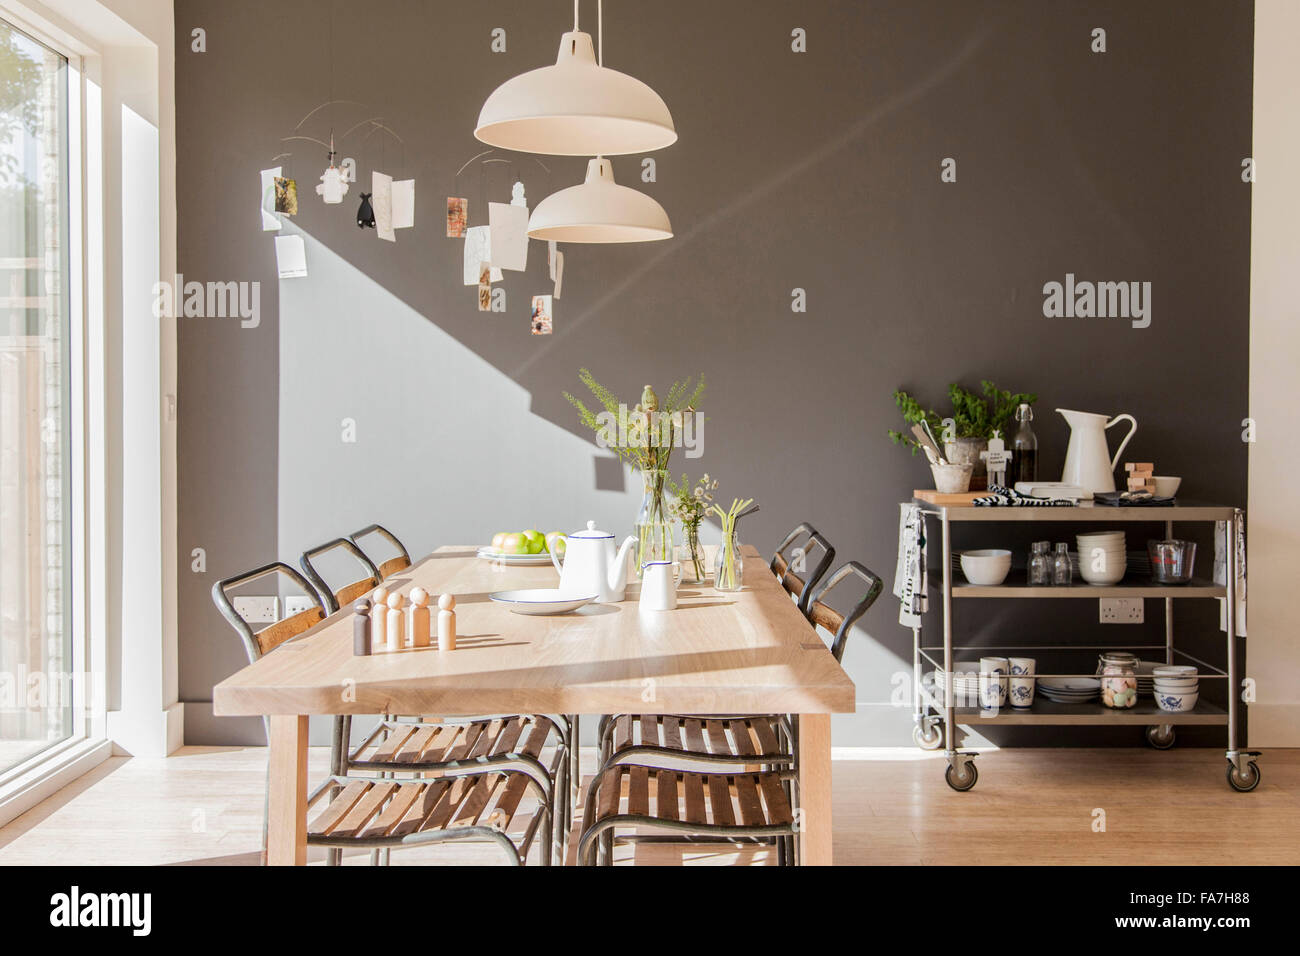 kitchen and dining area table and chairs with pendant lighting in residential house, Cambridge A house combining modern minimalist style with display of traditional objects used in every day life. Stock Photo